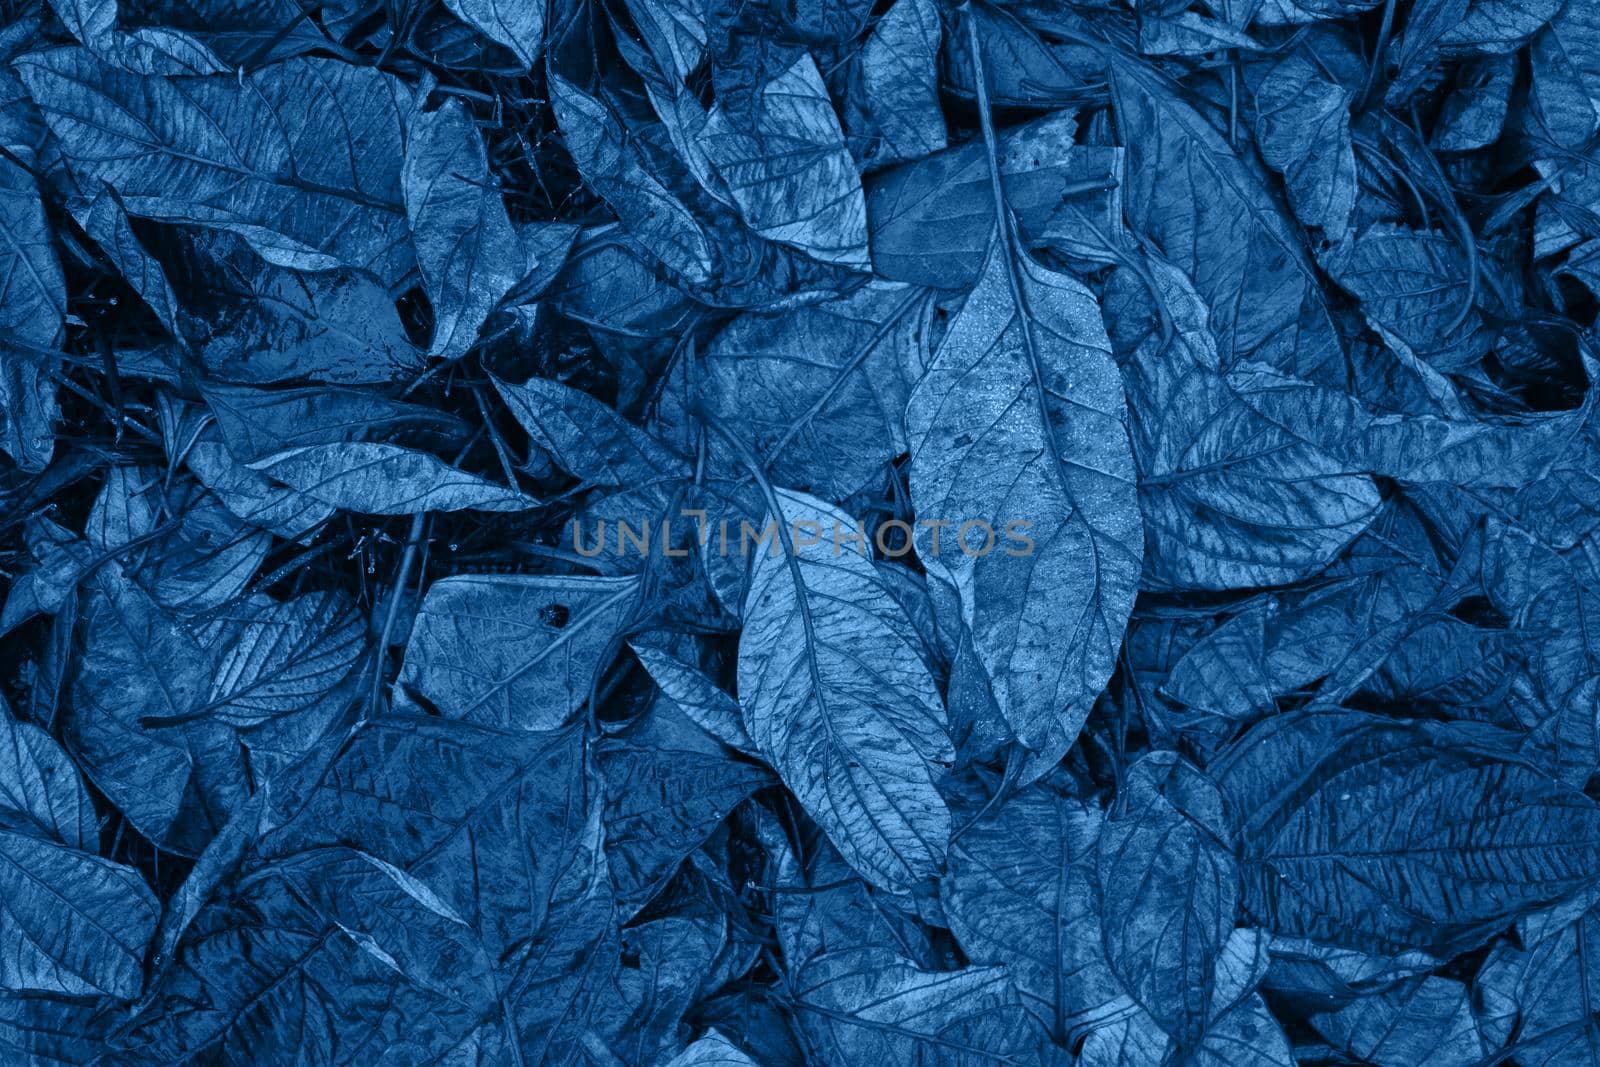 Classic blue monochrome moody dark art floral photo with little dried leaves on dark dry brown background, winter backdrop by NataBene